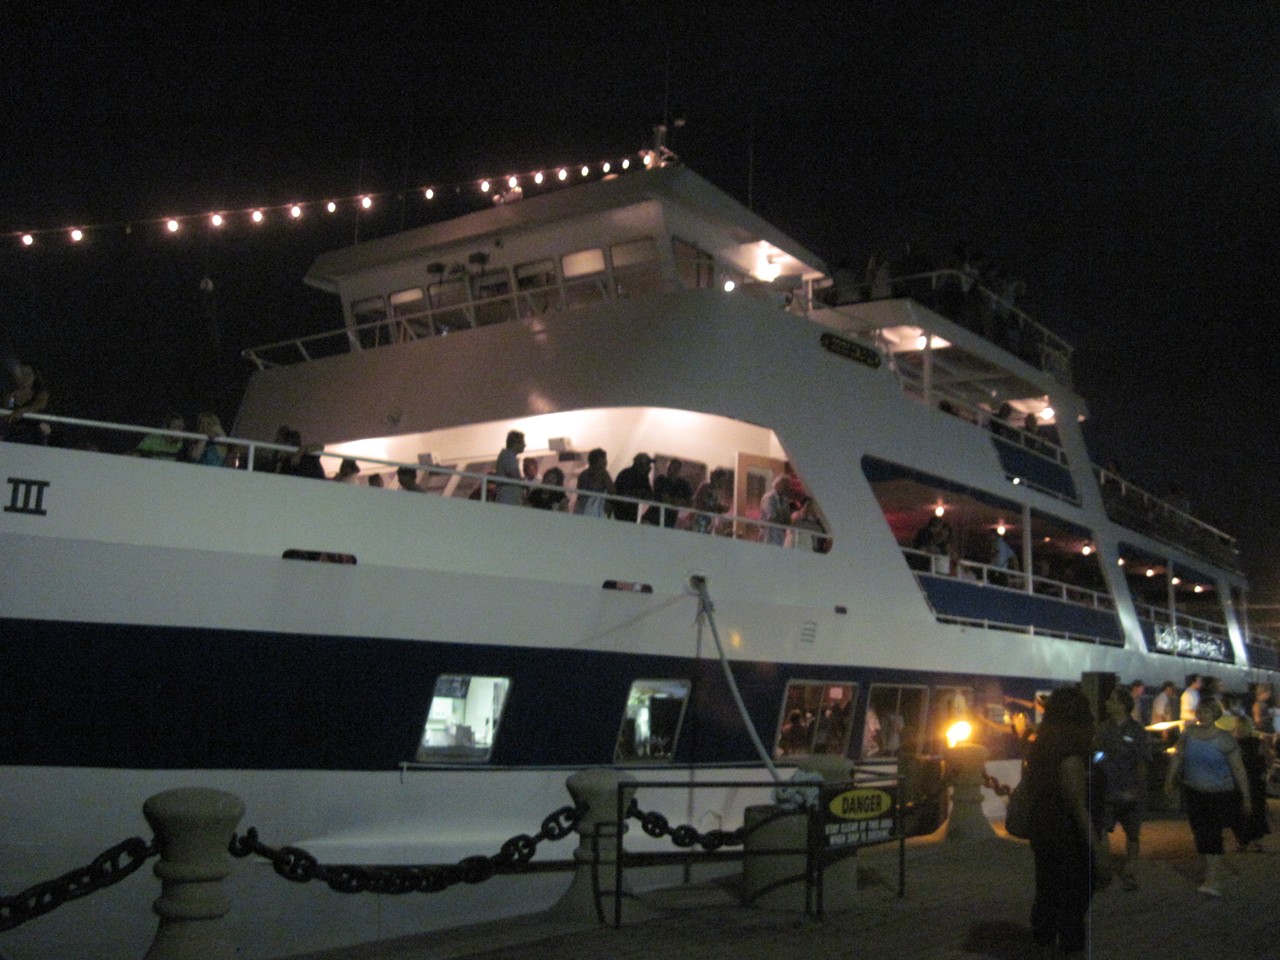 The boat docked around 10 p.m., but the music went on for much longer.